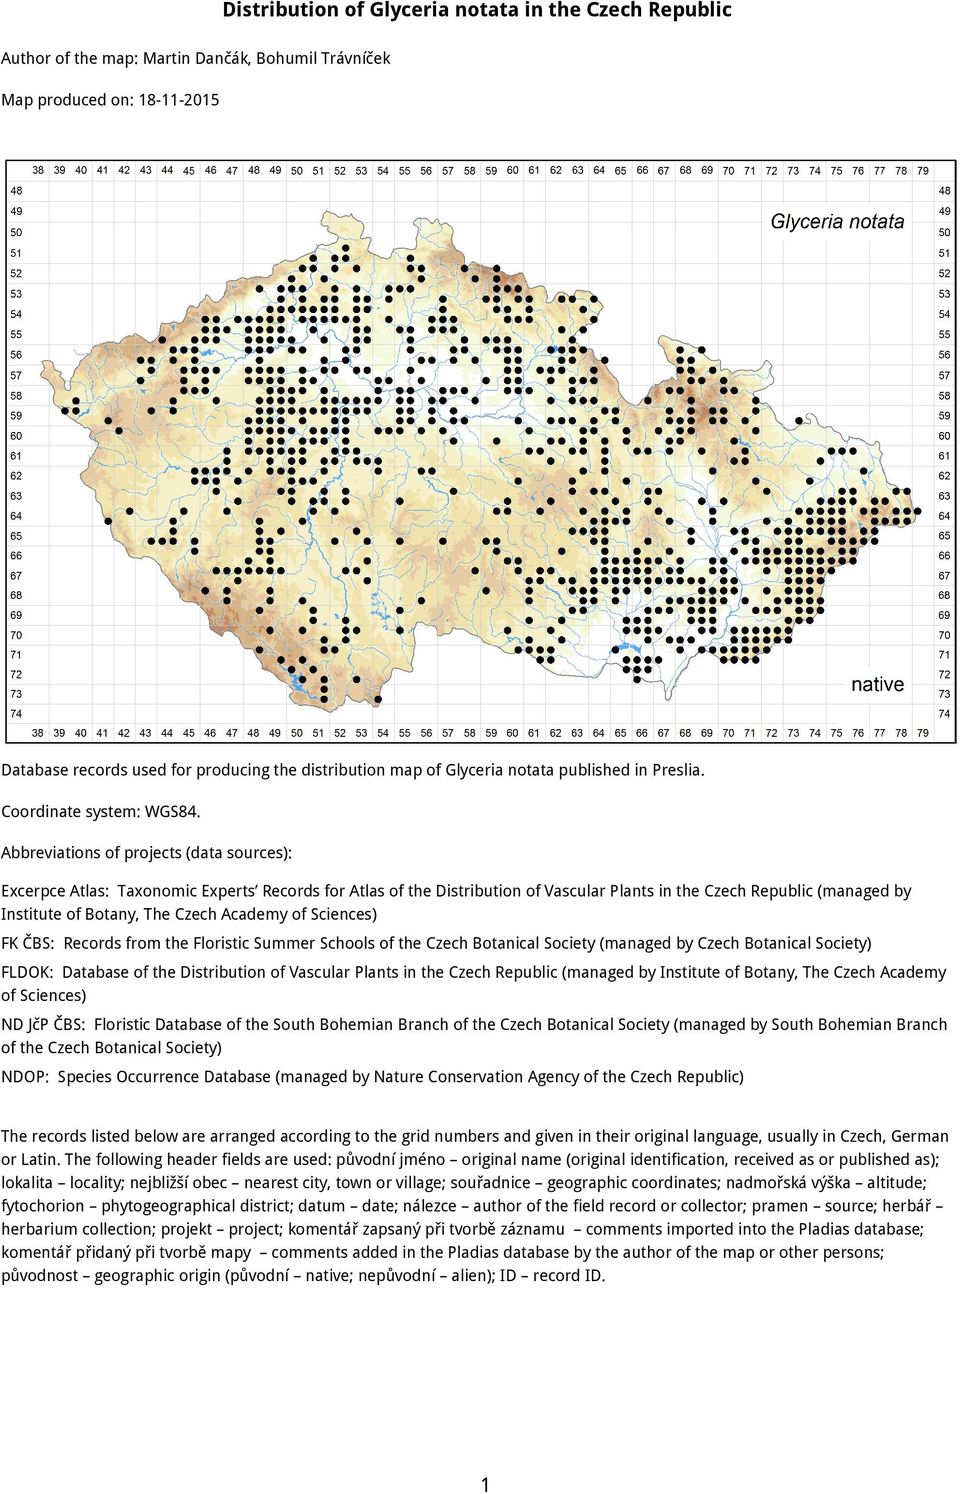 Abbreviations of projects (data sources): Excerpce Atlas: Taxonomic Experts Records for Atlas of the Distribution of Vascular Plants in the Czech Republic (managed by Institute of Botany, The Czech